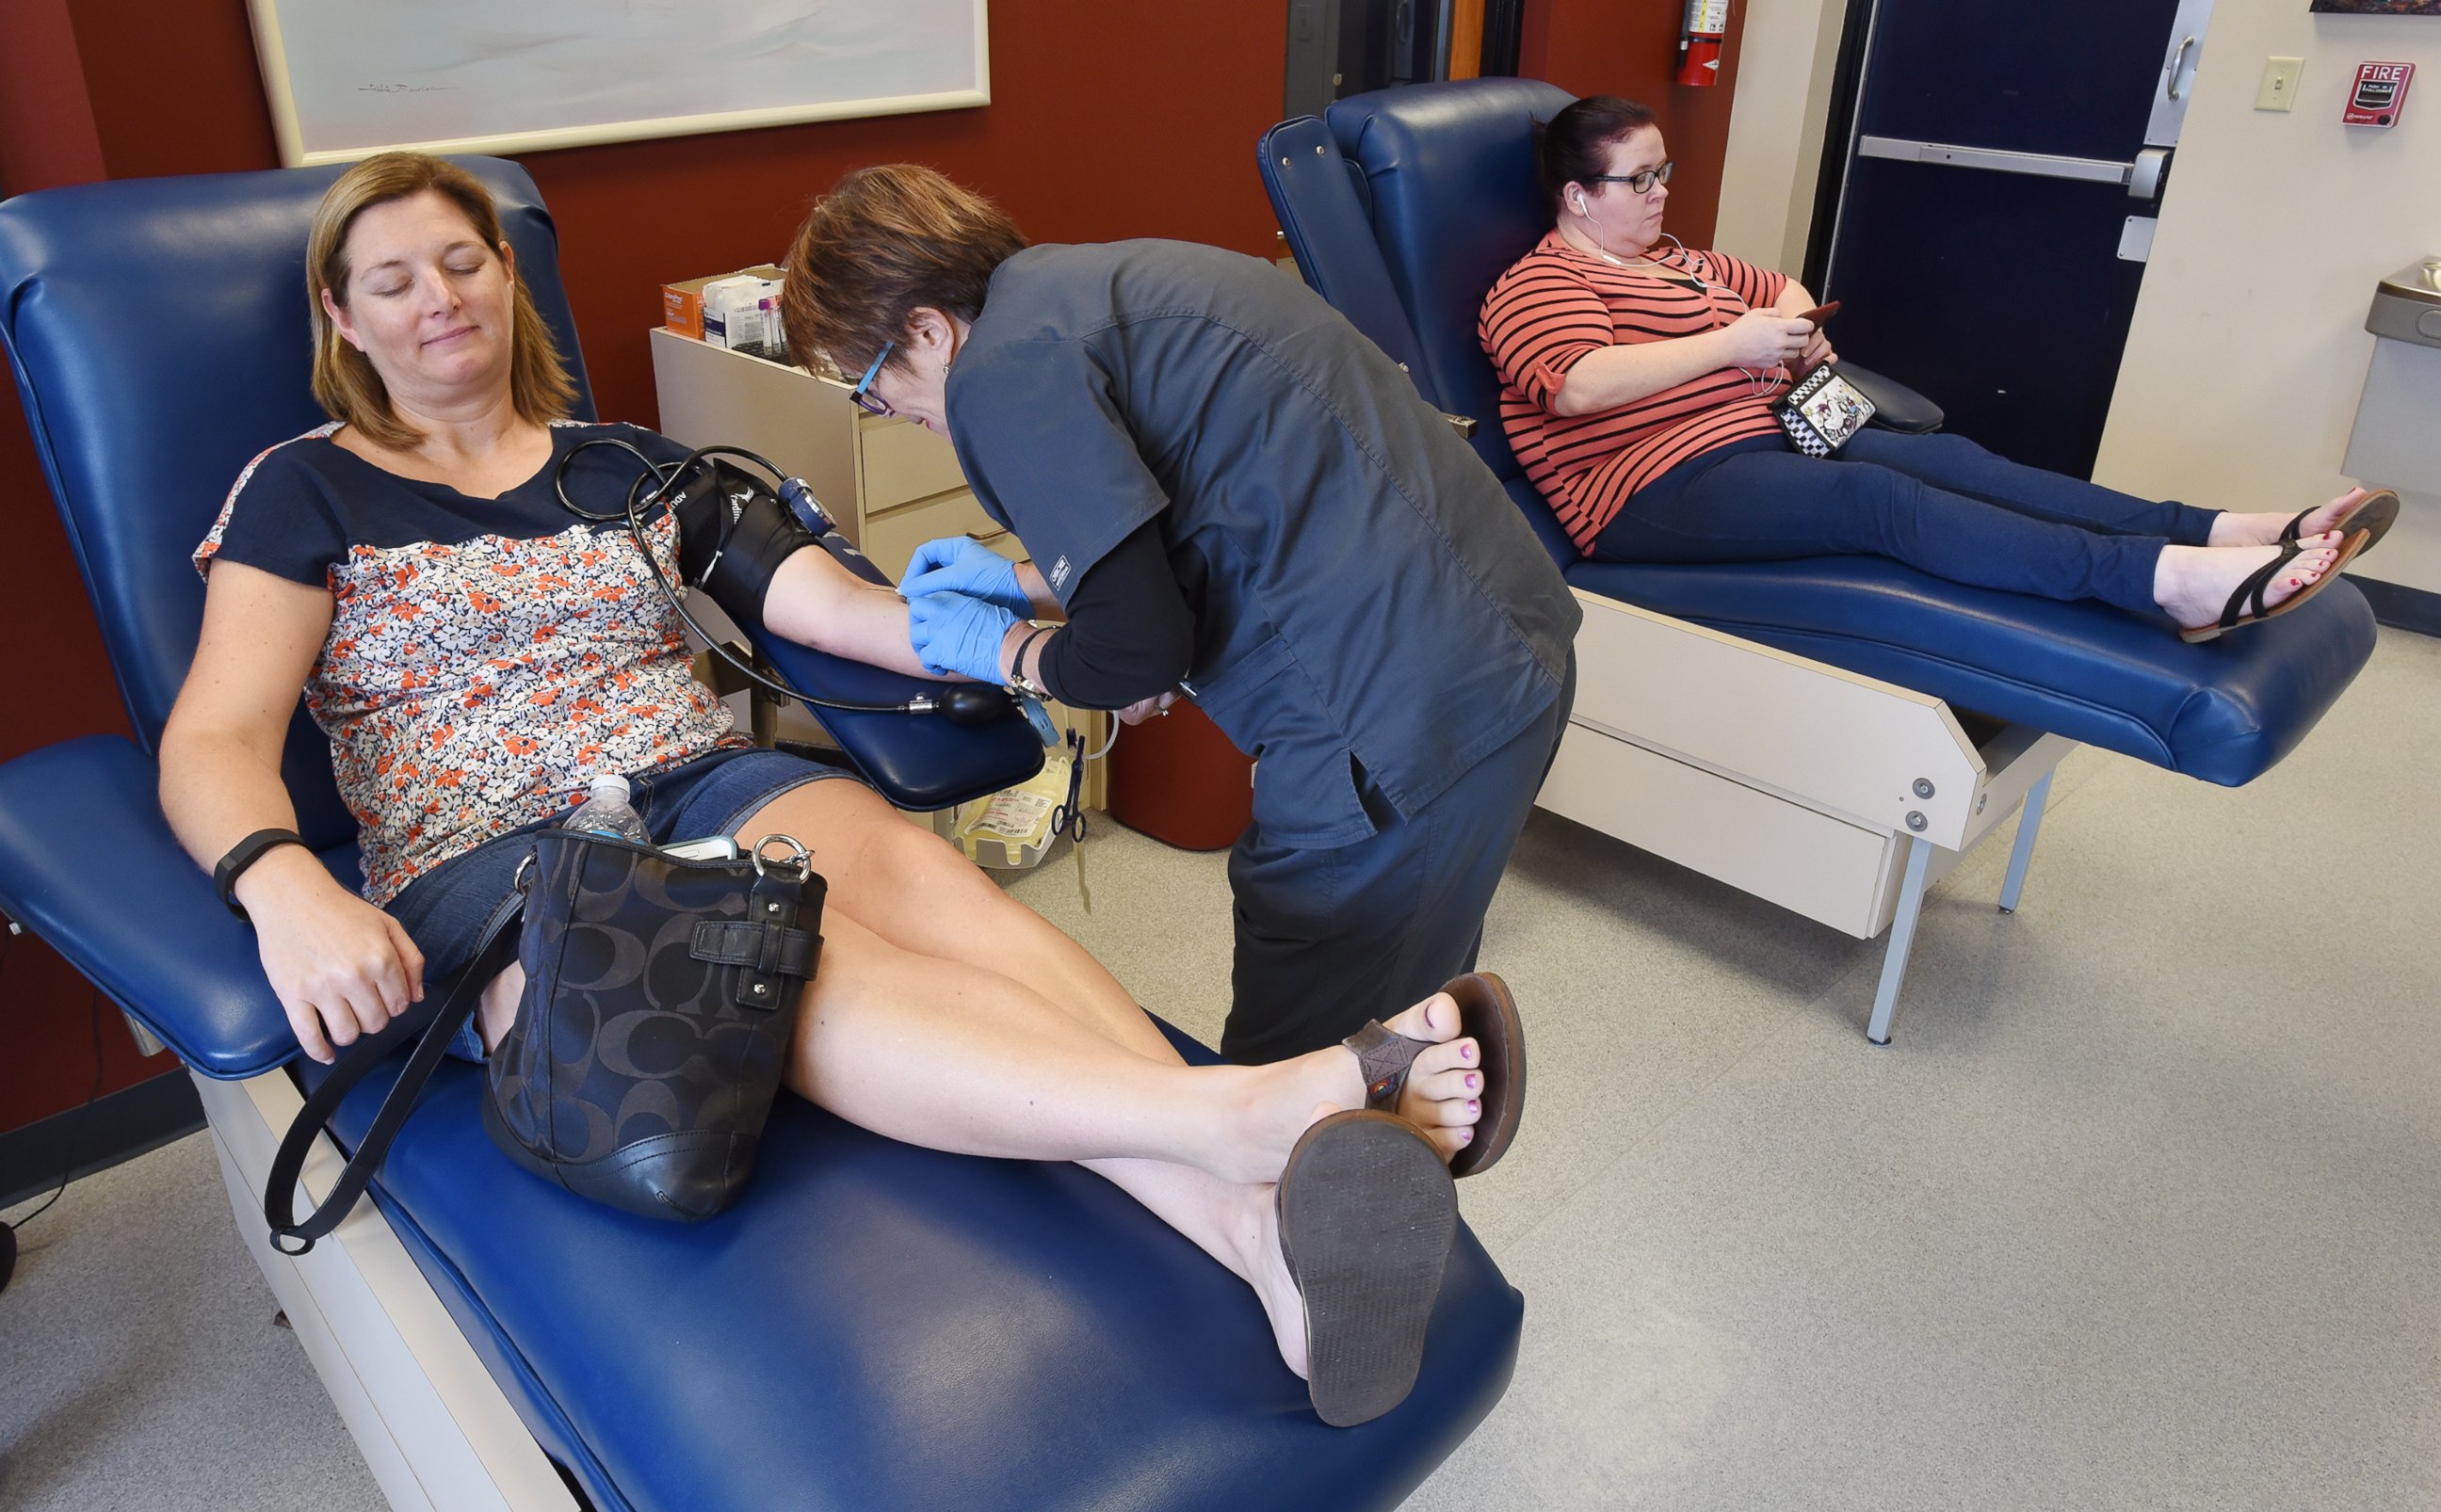 PHOTO: Aimee McCarthy from Jacksonville, Fla., gives blood at the Oneblood facility on Beach Blvd. In Jacksonville, Fla., June 12, 2016, to help the victims from a mass shooting at a nightclub in Orlando, June 12, 2016.